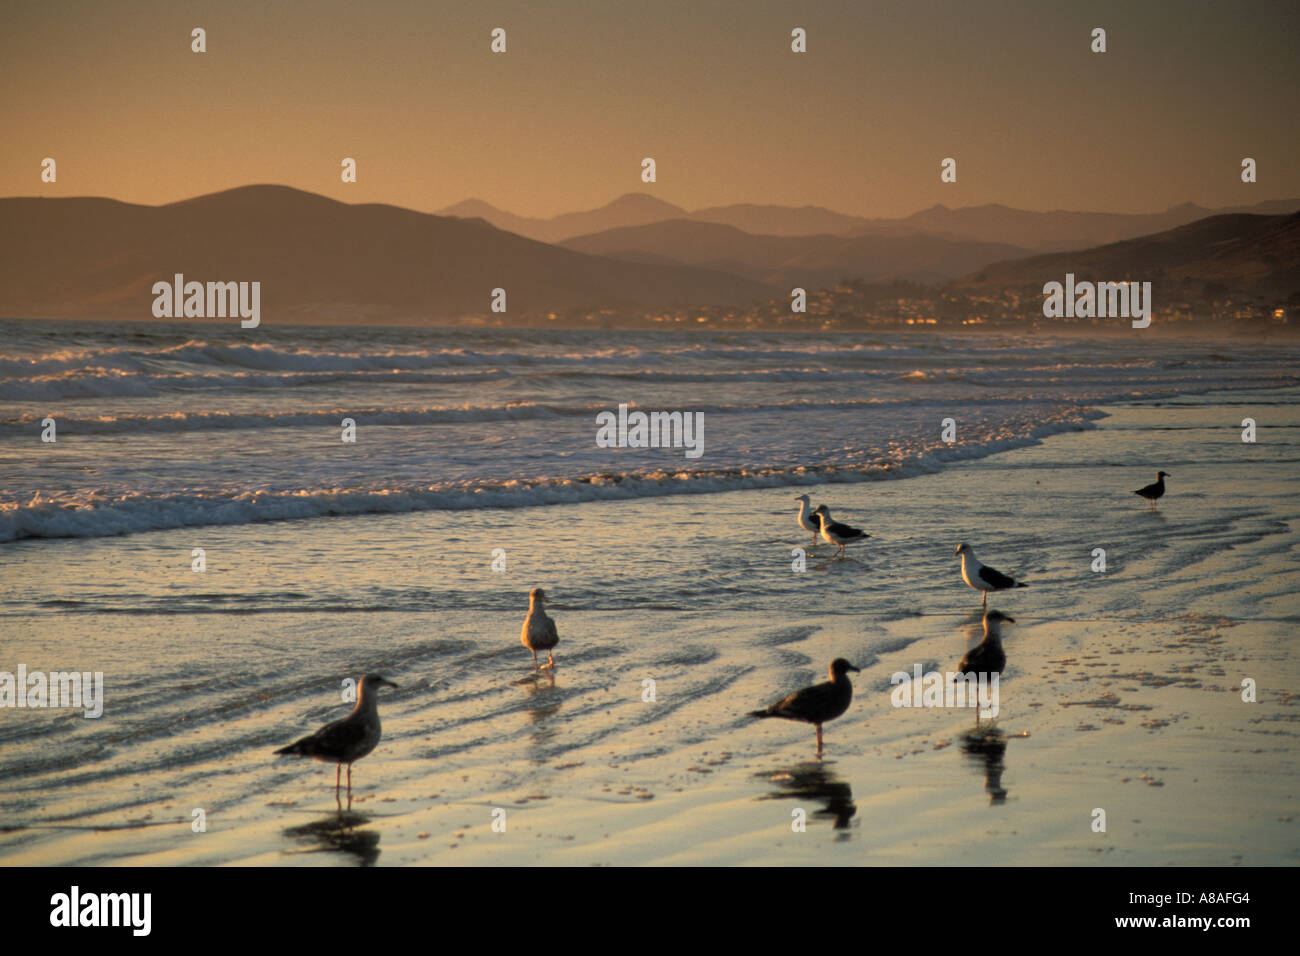 Seagulls on sand beach in surf zone Morro Strand State Beach at sunset near Cayucos and Morro Bay California Stock Photo